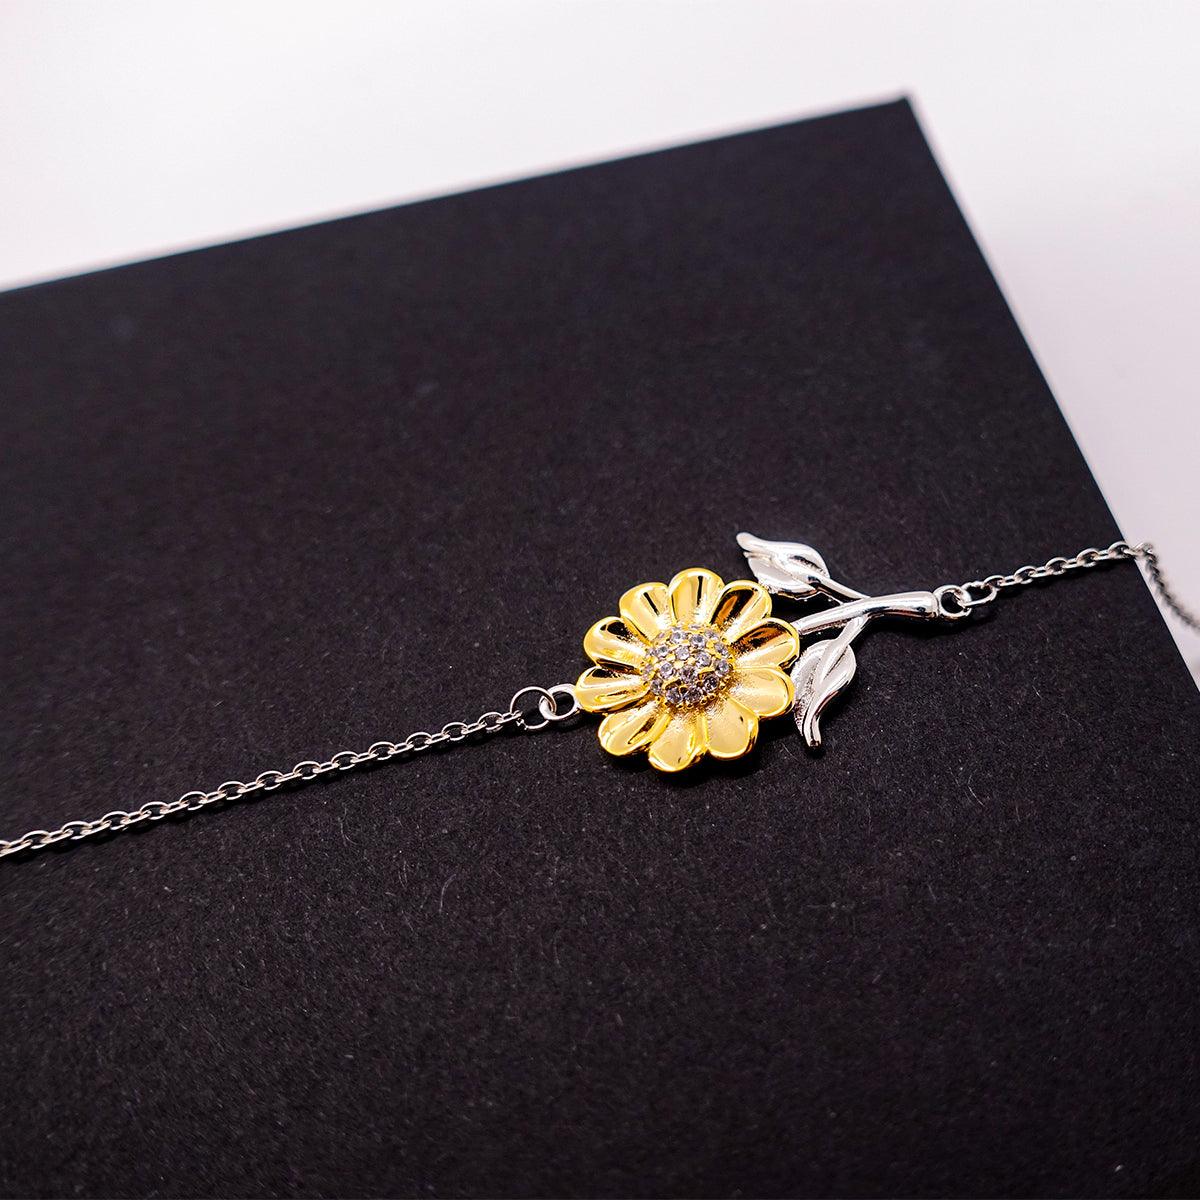 Remarkable Pilot Gifts, Your dedication and hard work, Inspirational Birthday Christmas Unique Sunflower Bracelet For Pilot, Coworkers, Men, Women, Friends - Mallard Moon Gift Shop